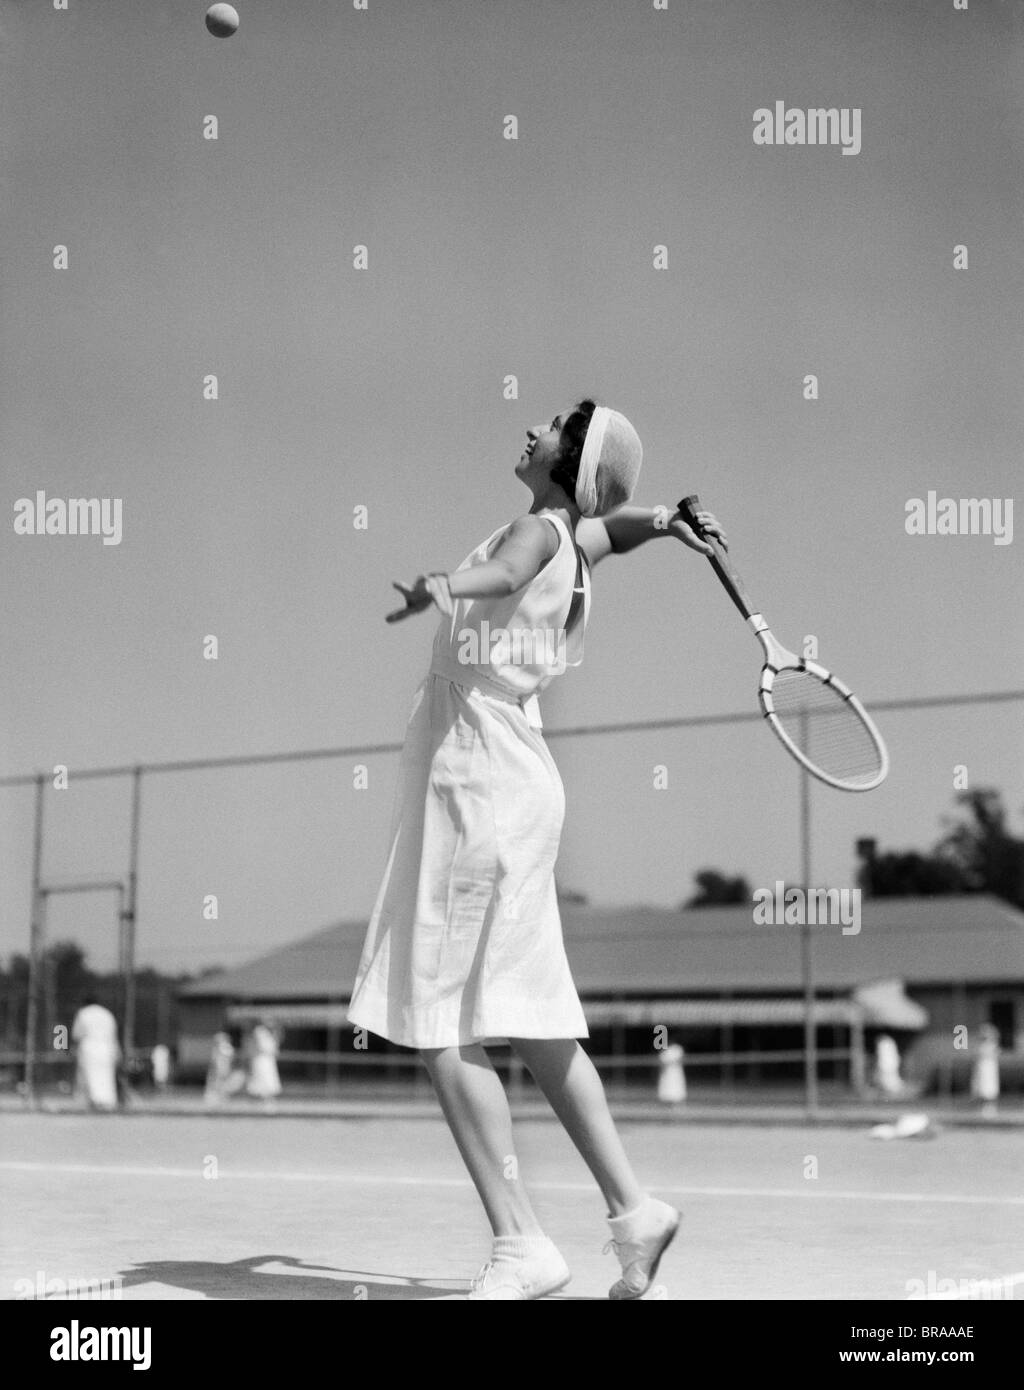 1930s WOMAN PLAYING TENNIS ABOUT TO HIT BALL WITH RACKET Stock Photo